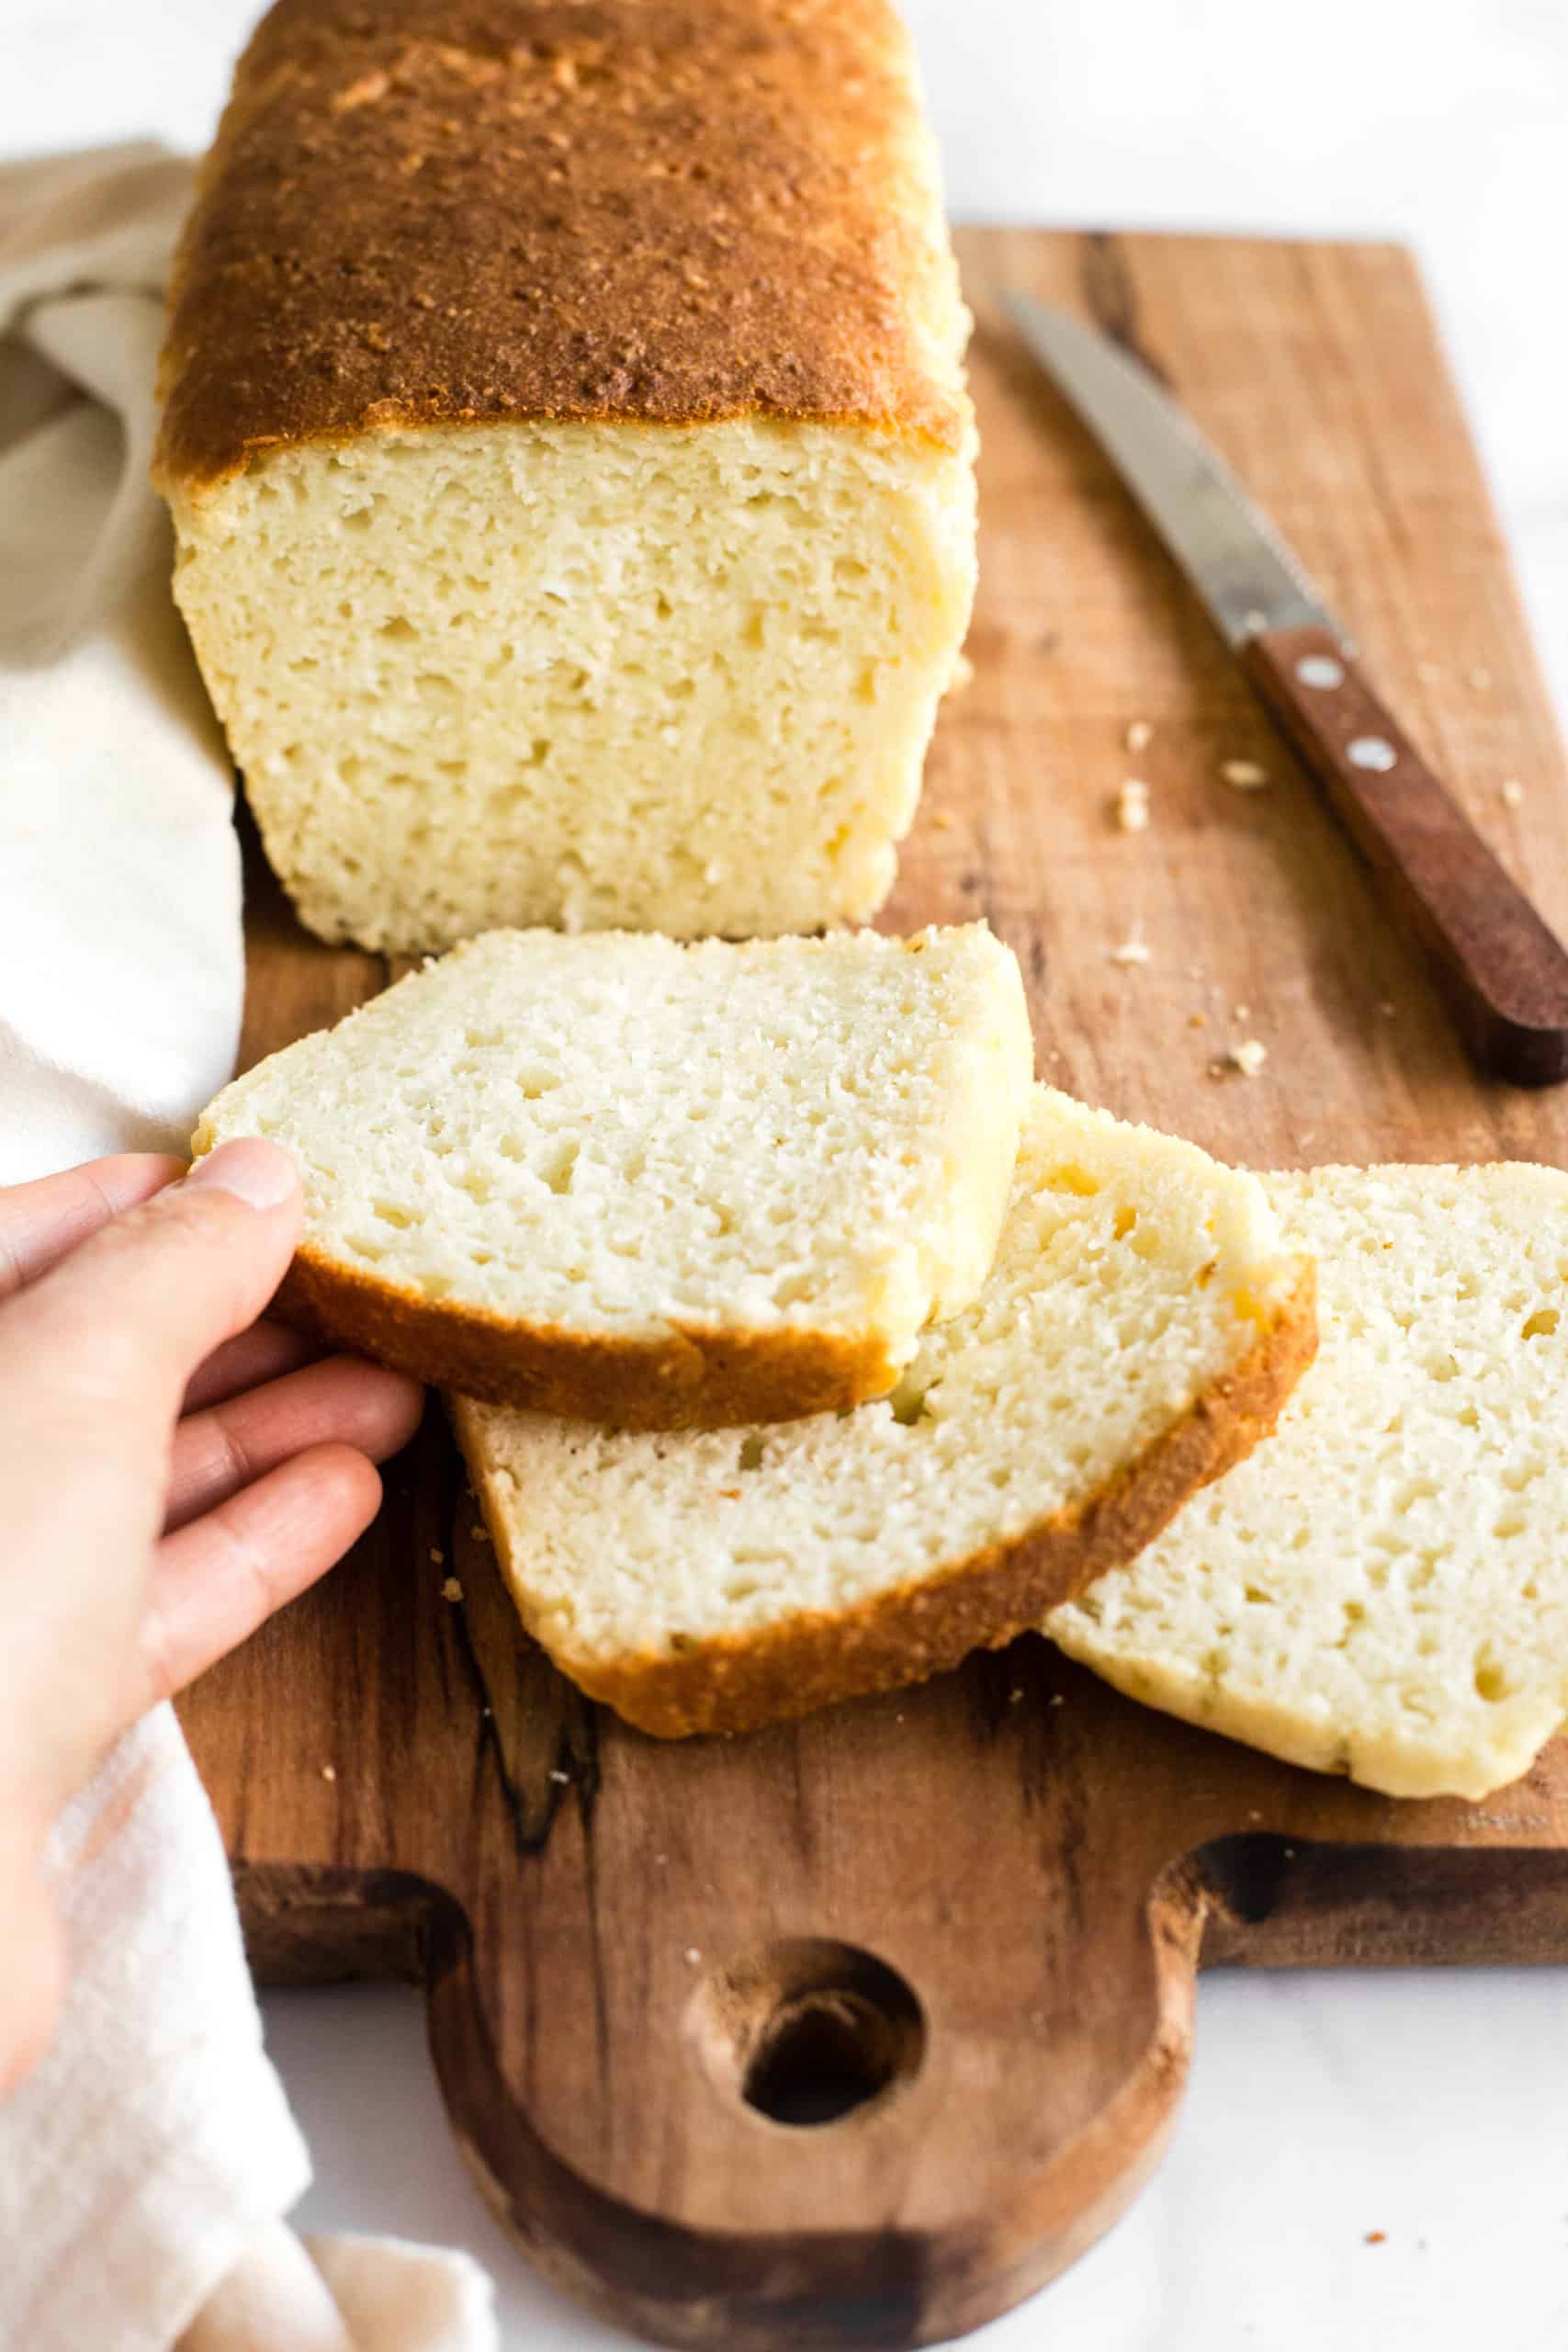 A hand holding a slice of freshly baked gluten-free bread.